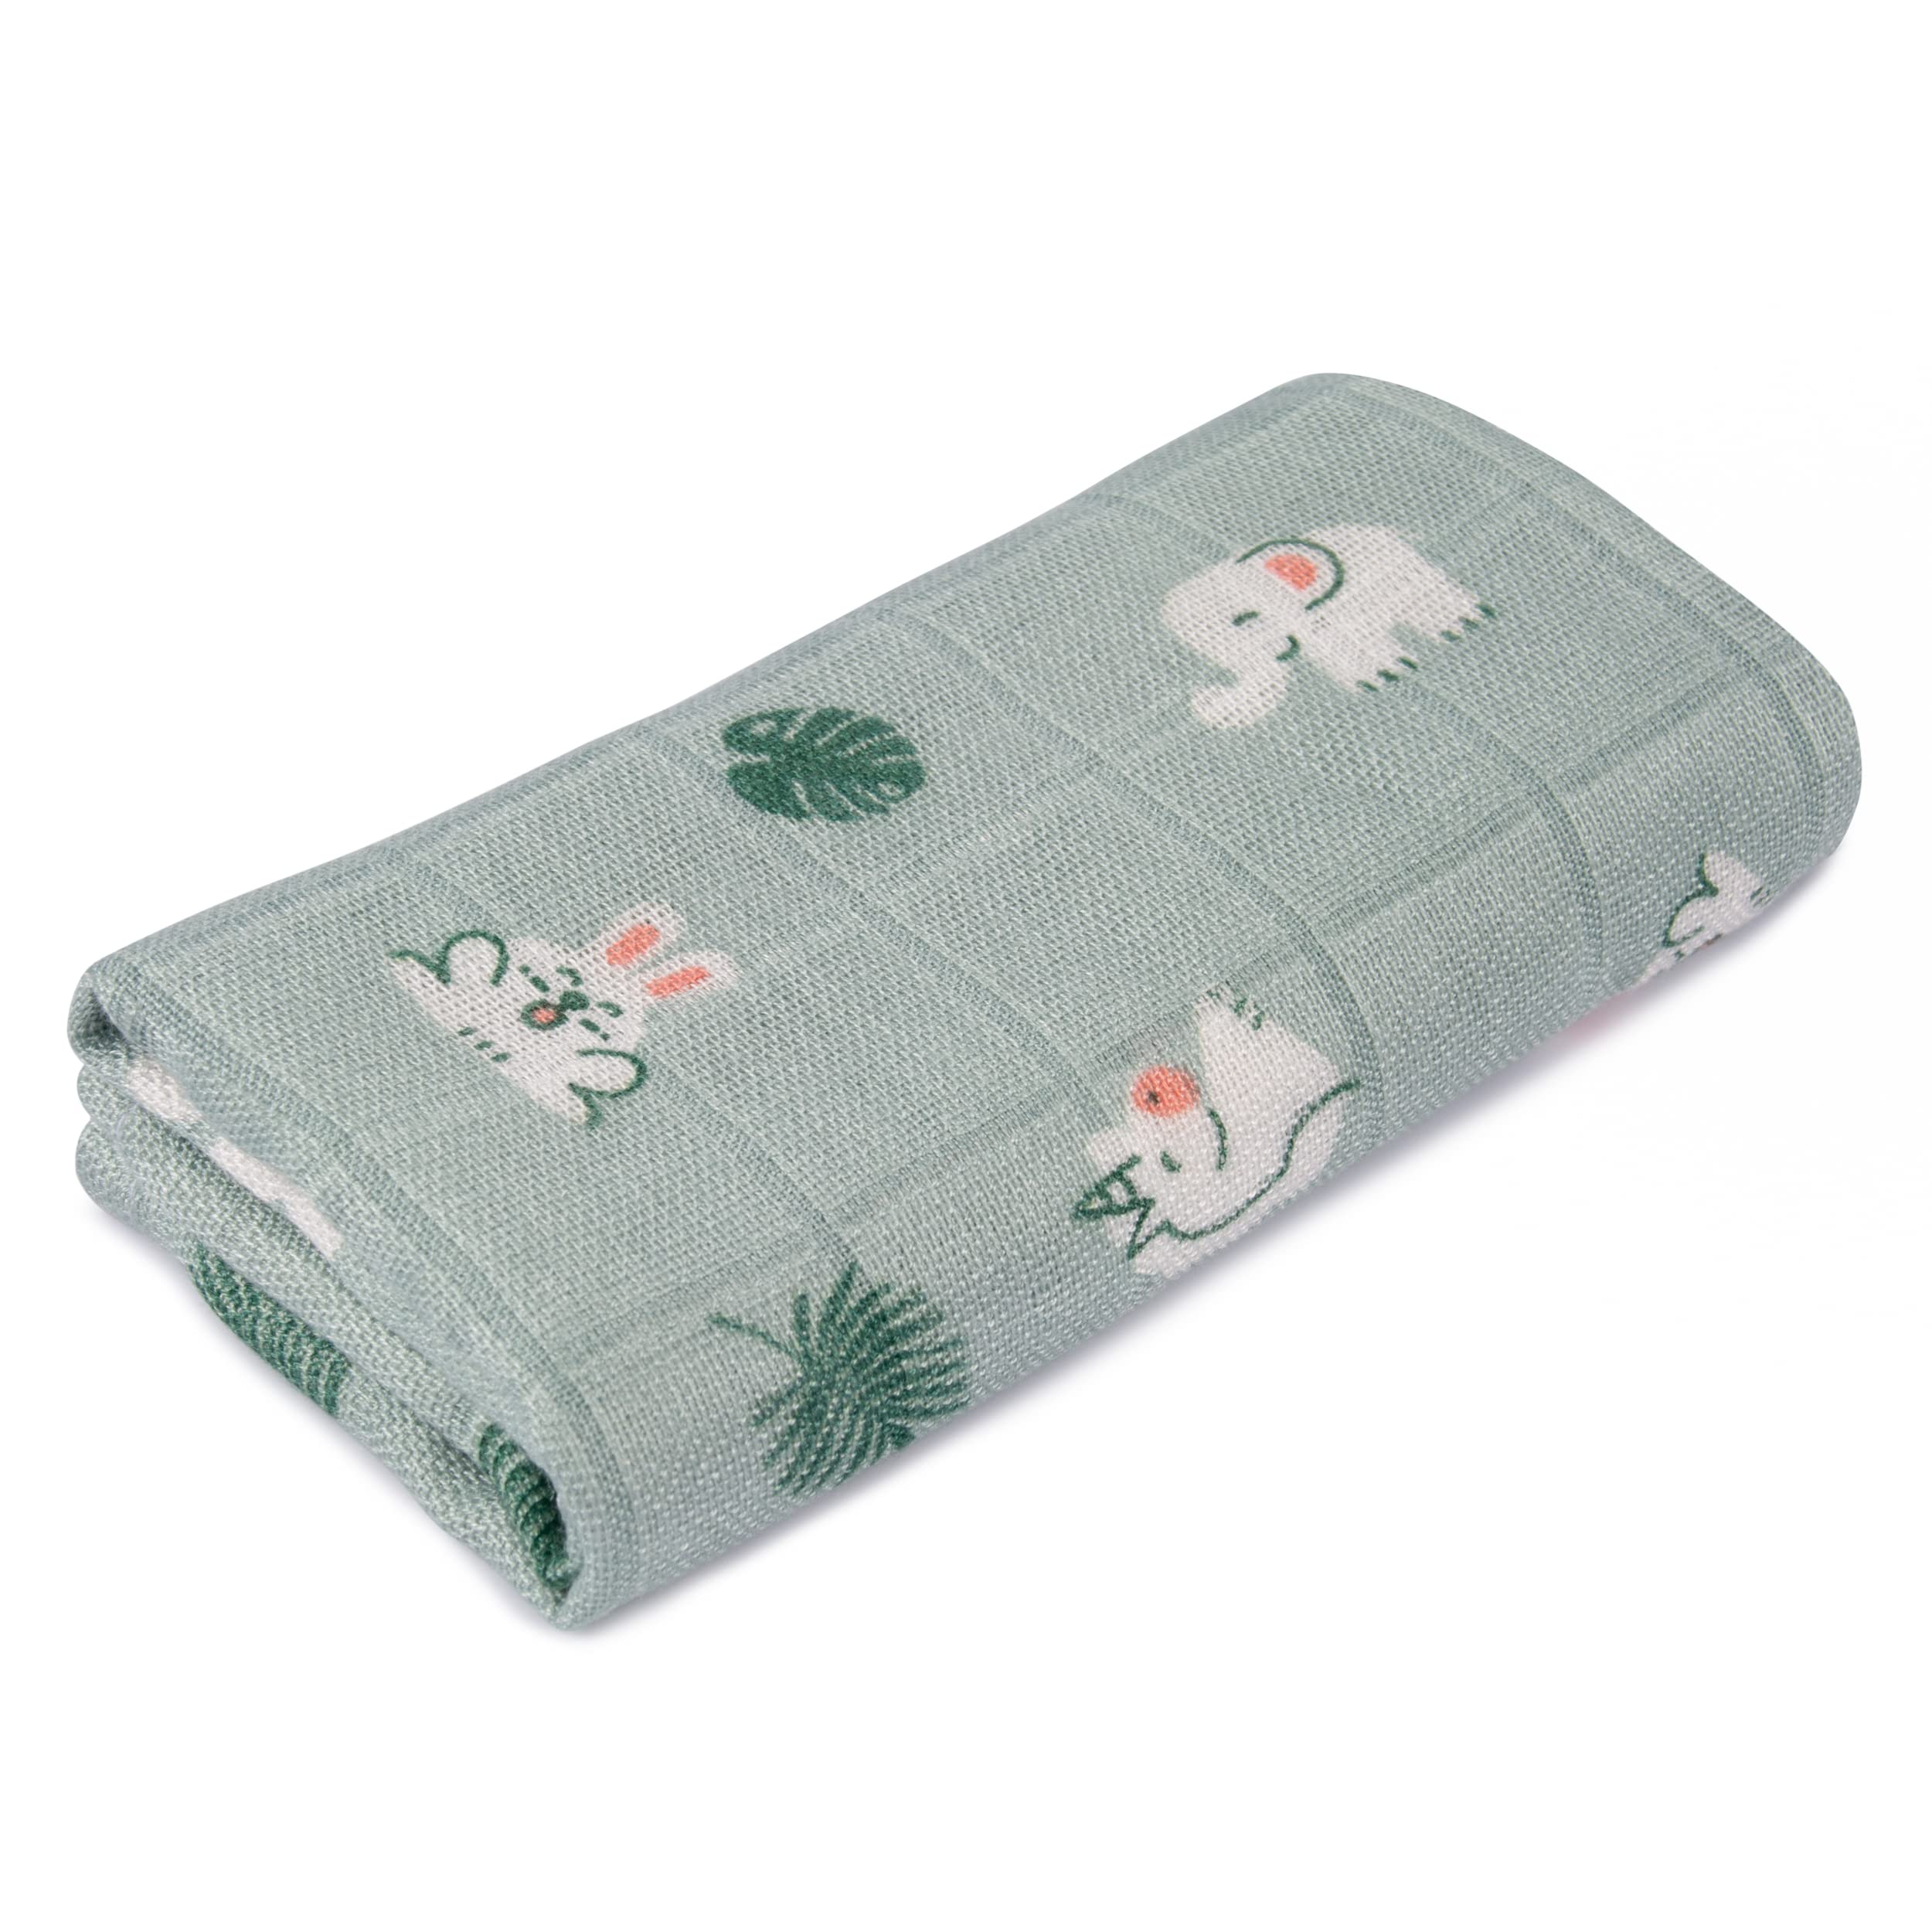 Mush 100% Bamboo Swaddle : Ultra Soft, Breathable, Thermoregulating, Absorbent, Light Weight and Multipurpose Bamboo Wrapper/Baby Bath Towel/Blanket (1, Rabbit Green)